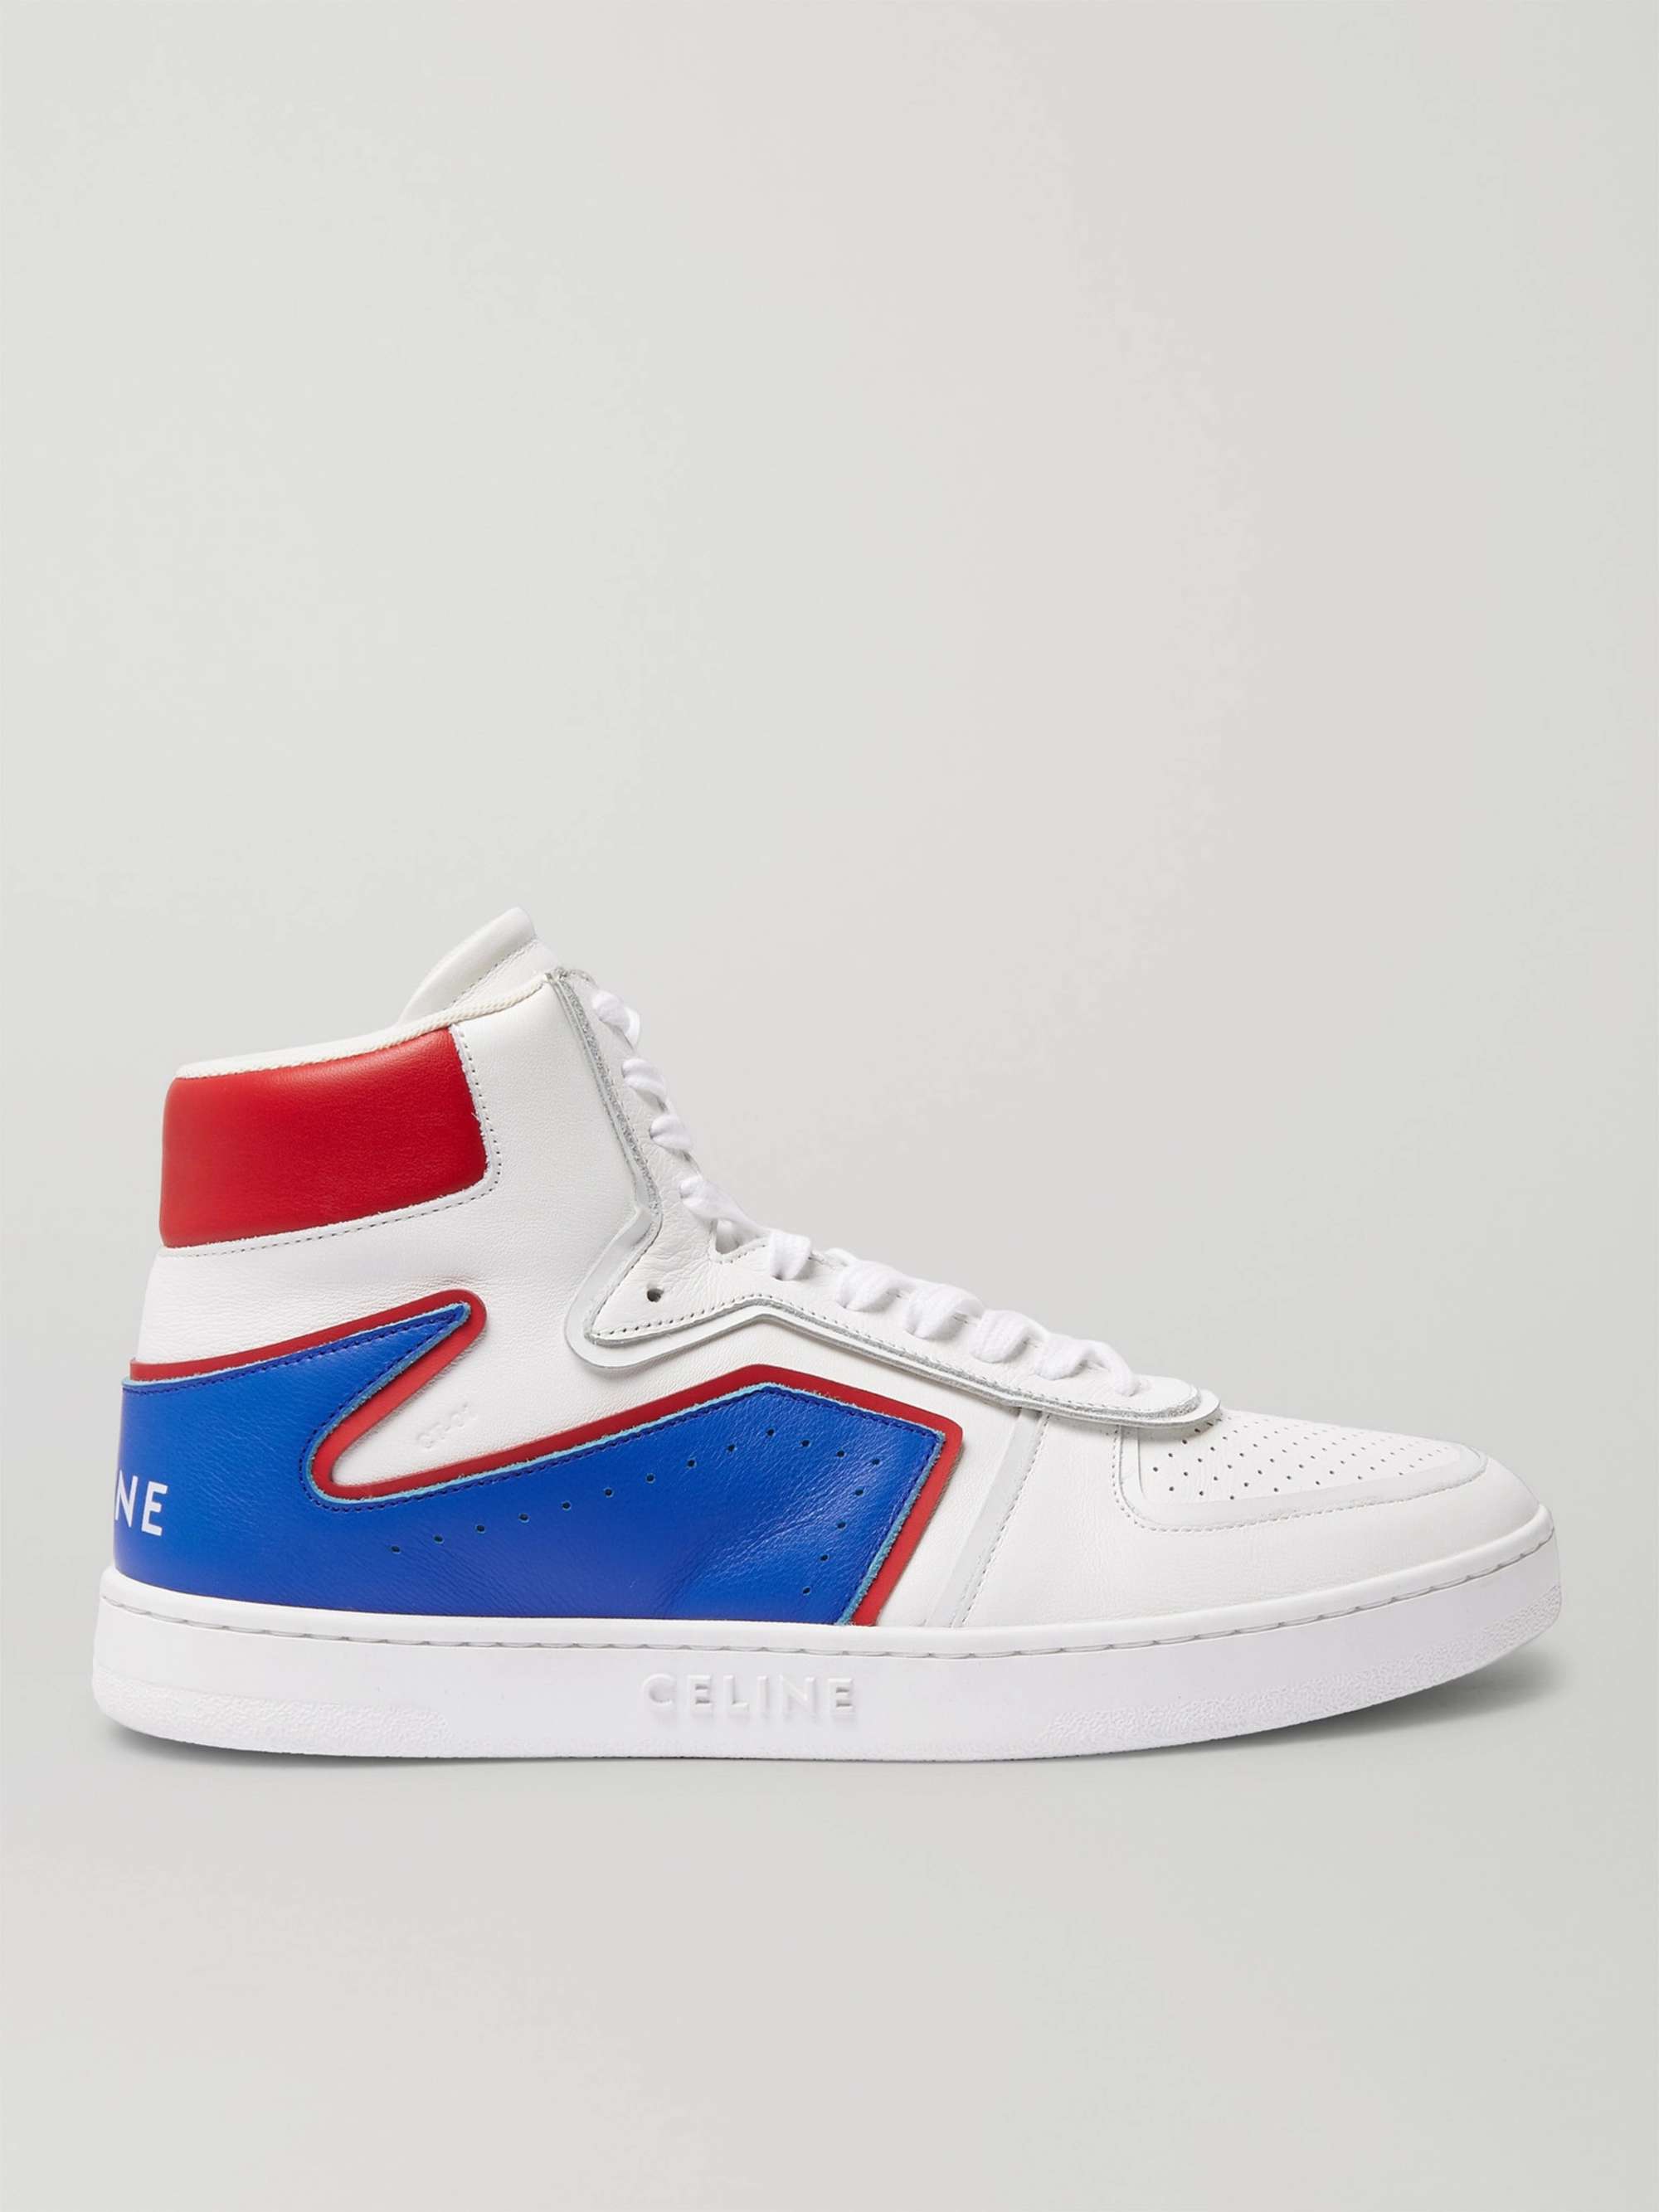 CELINE HOMME Z Leather High-Top Sneakers